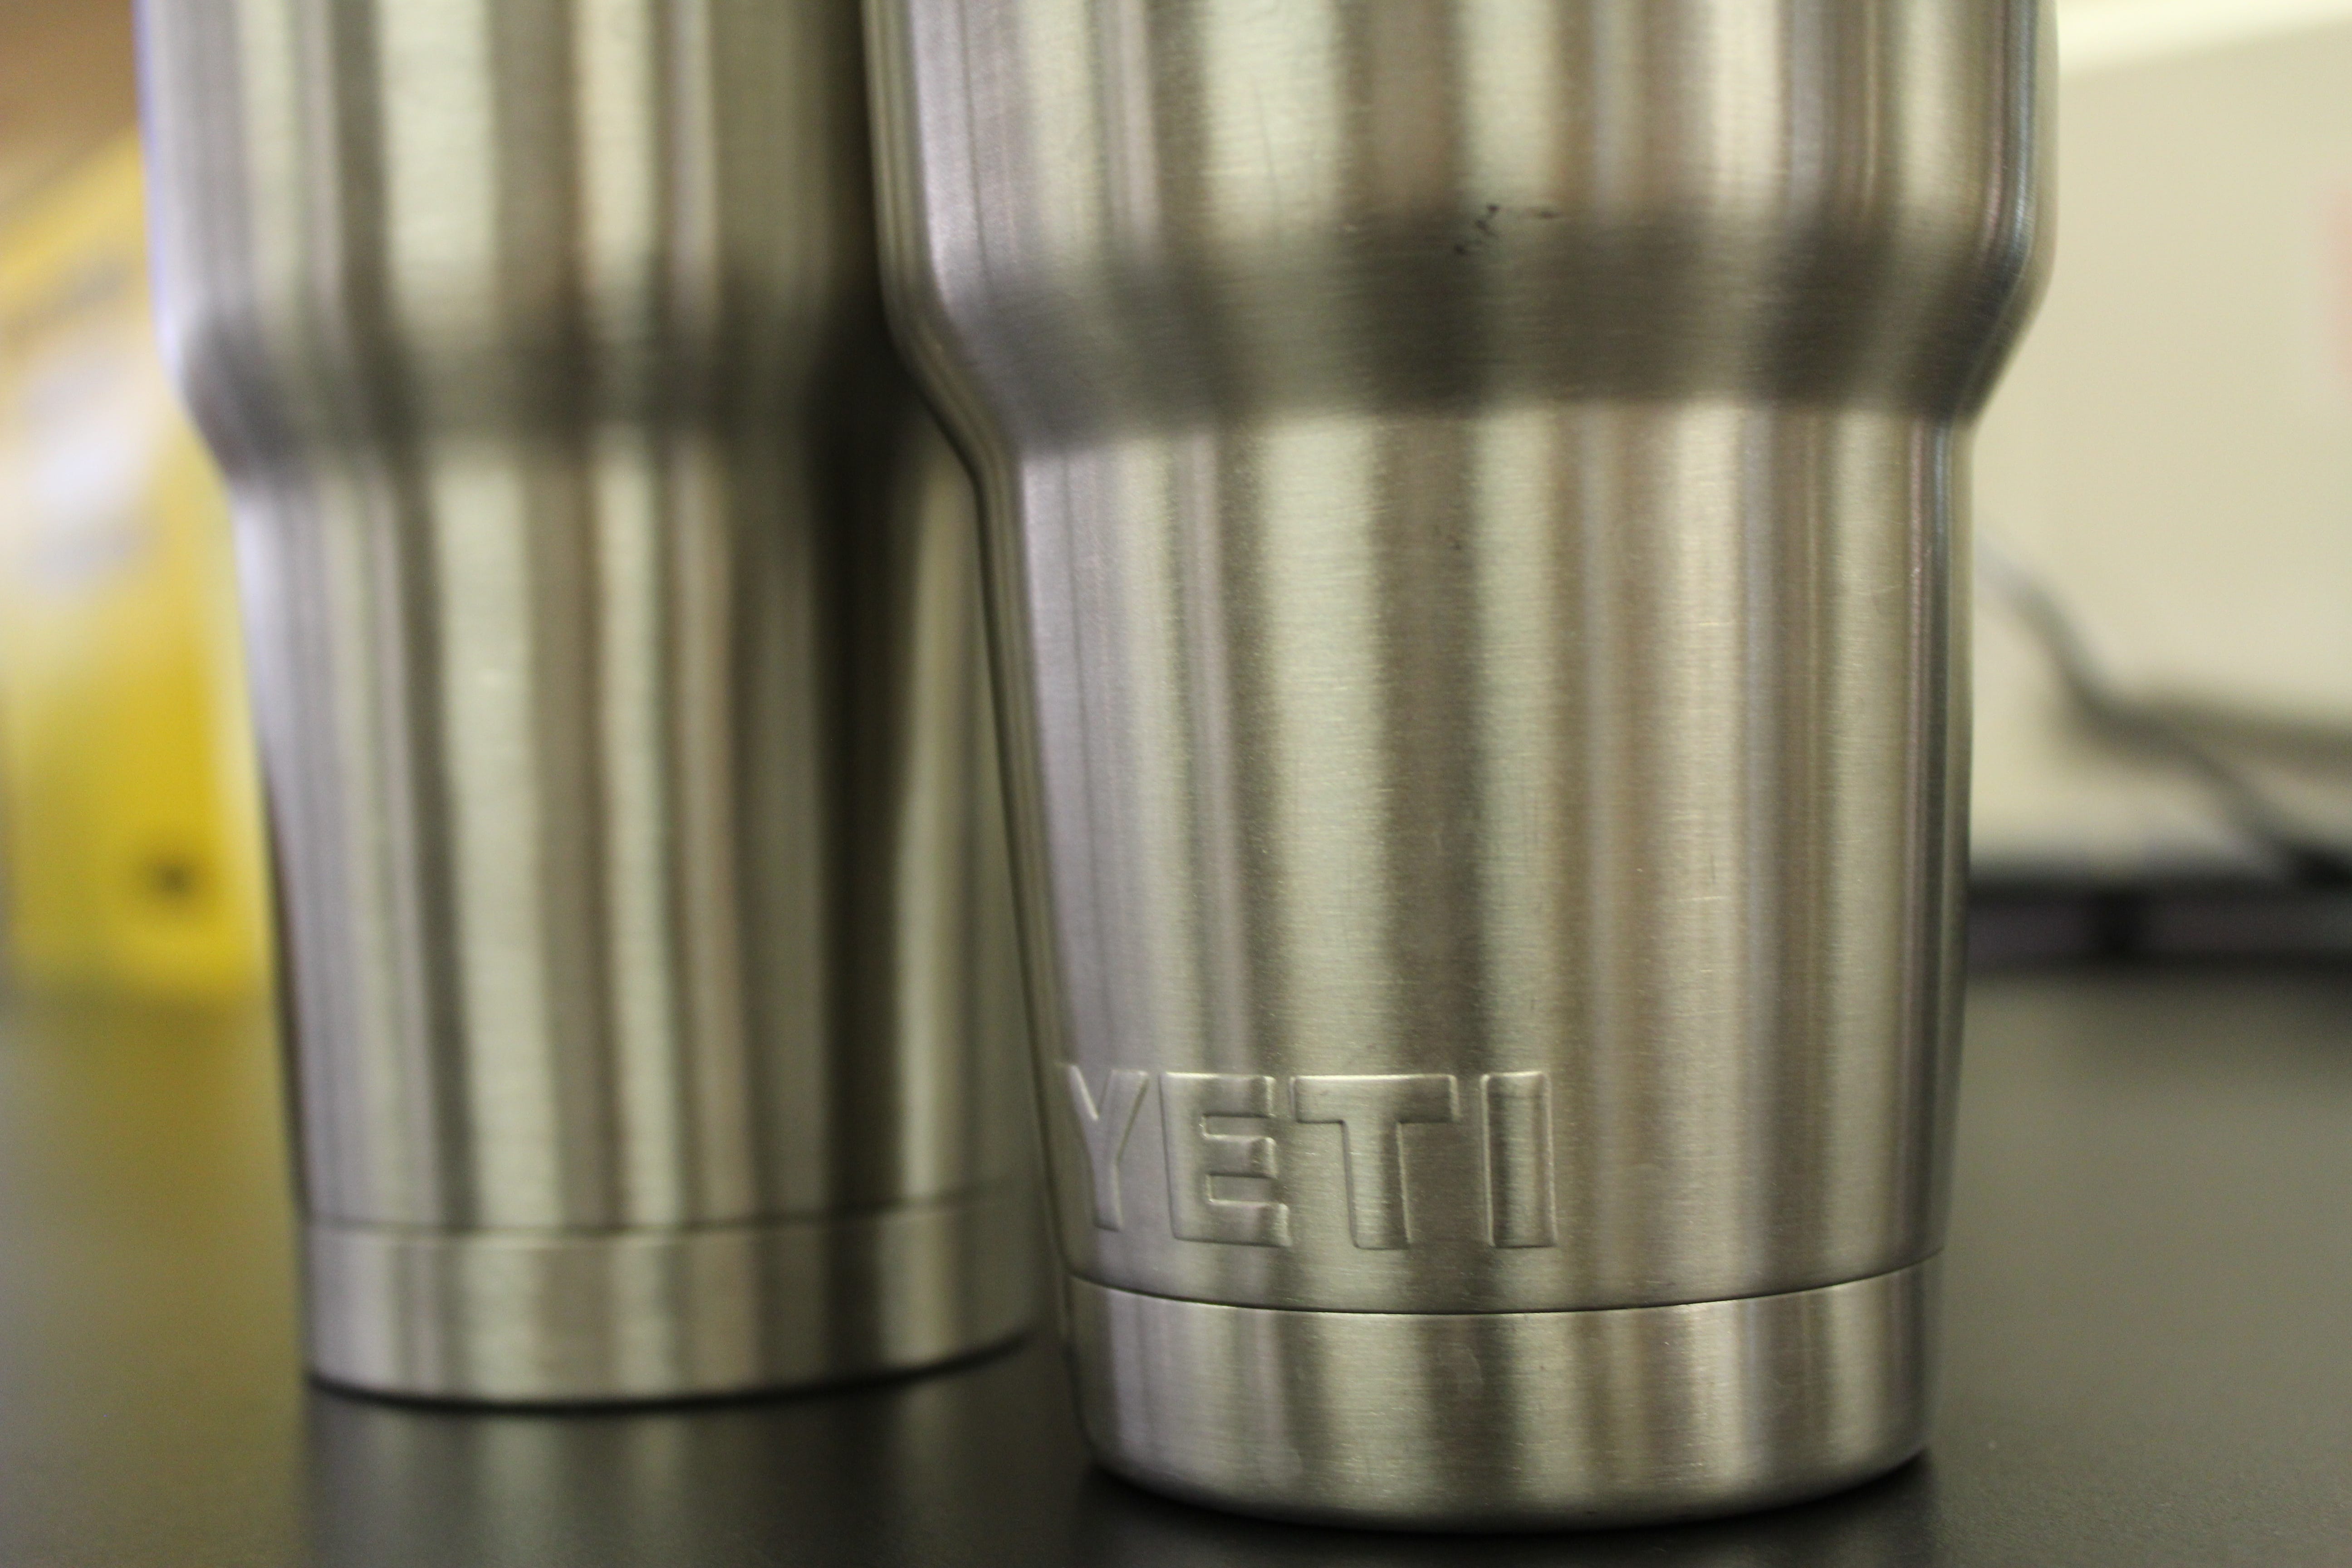 yeti can cup